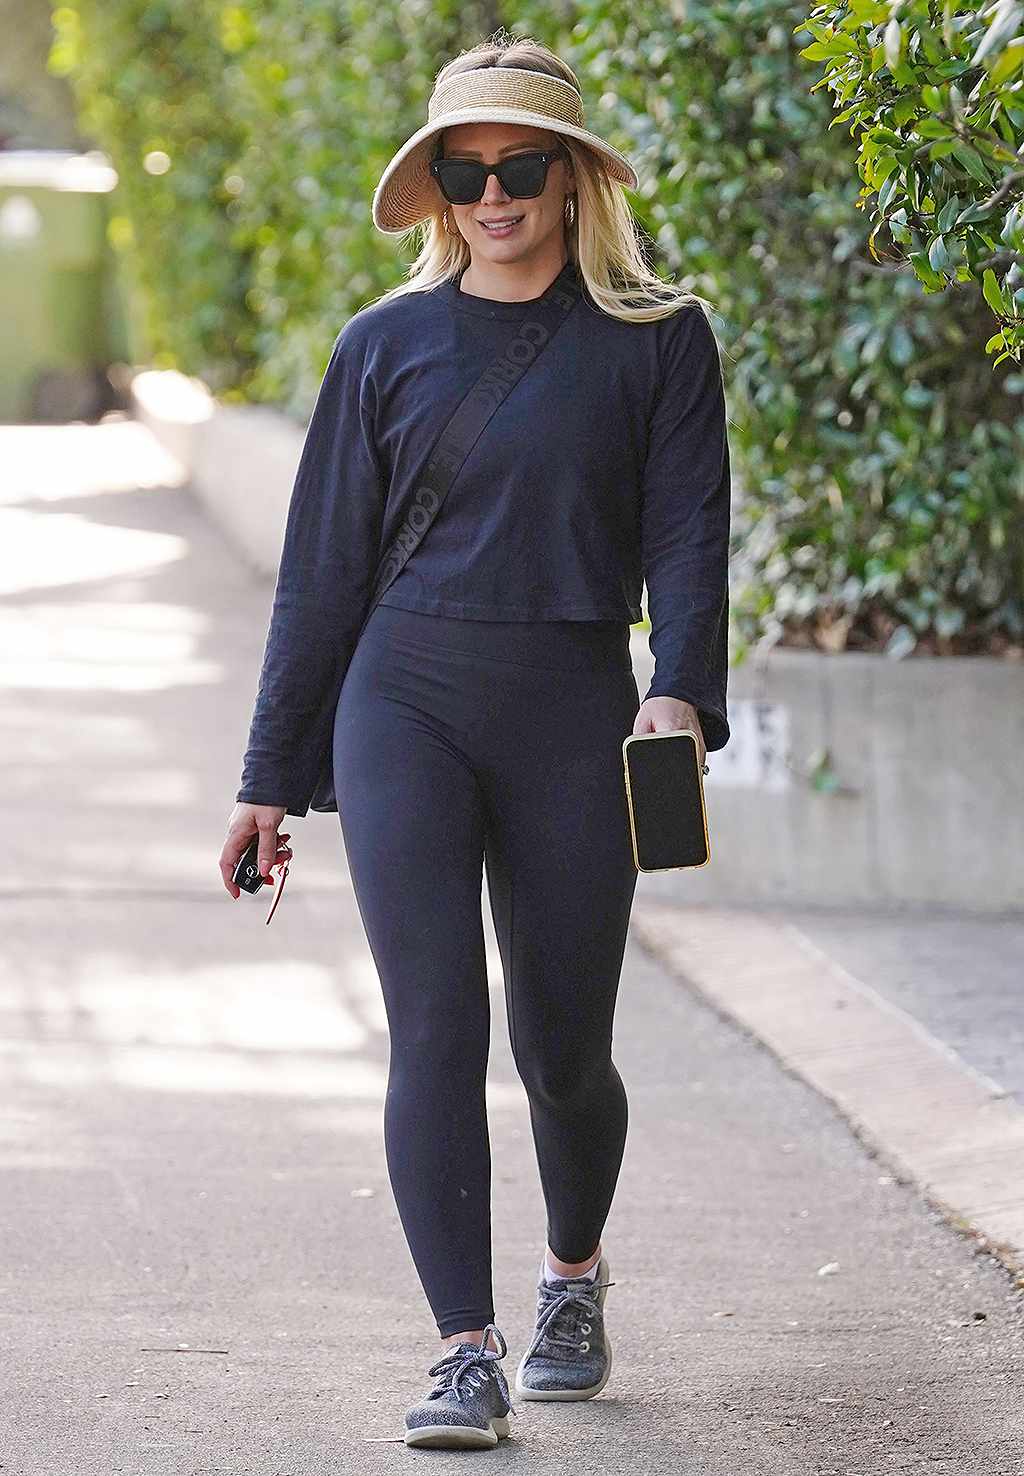 Hilary Duff is seen on January 26, 2022 in Los Angeles, California.